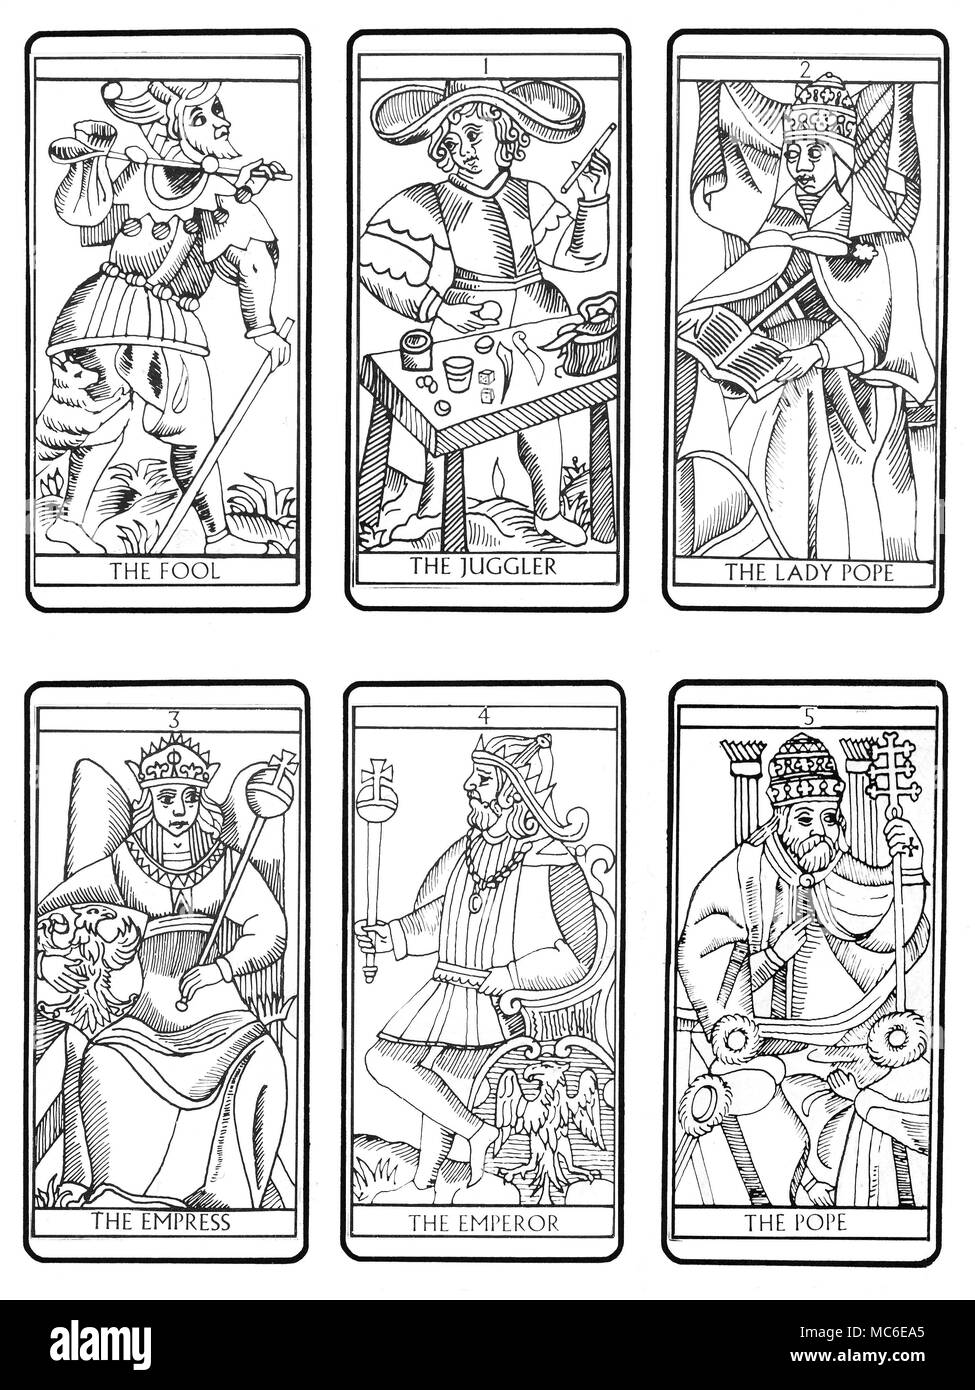 TAROT CARDS - MARSEILLES DECK First six of the sequence of 22 Tarot cards (according to the traditional Marseilles design), from the zero card (The Fool), through The Juggler, The Lady Pope, The Empress, the Emperor and The Pope. The remaining sequences are available, in batches of 6. Stock Photo